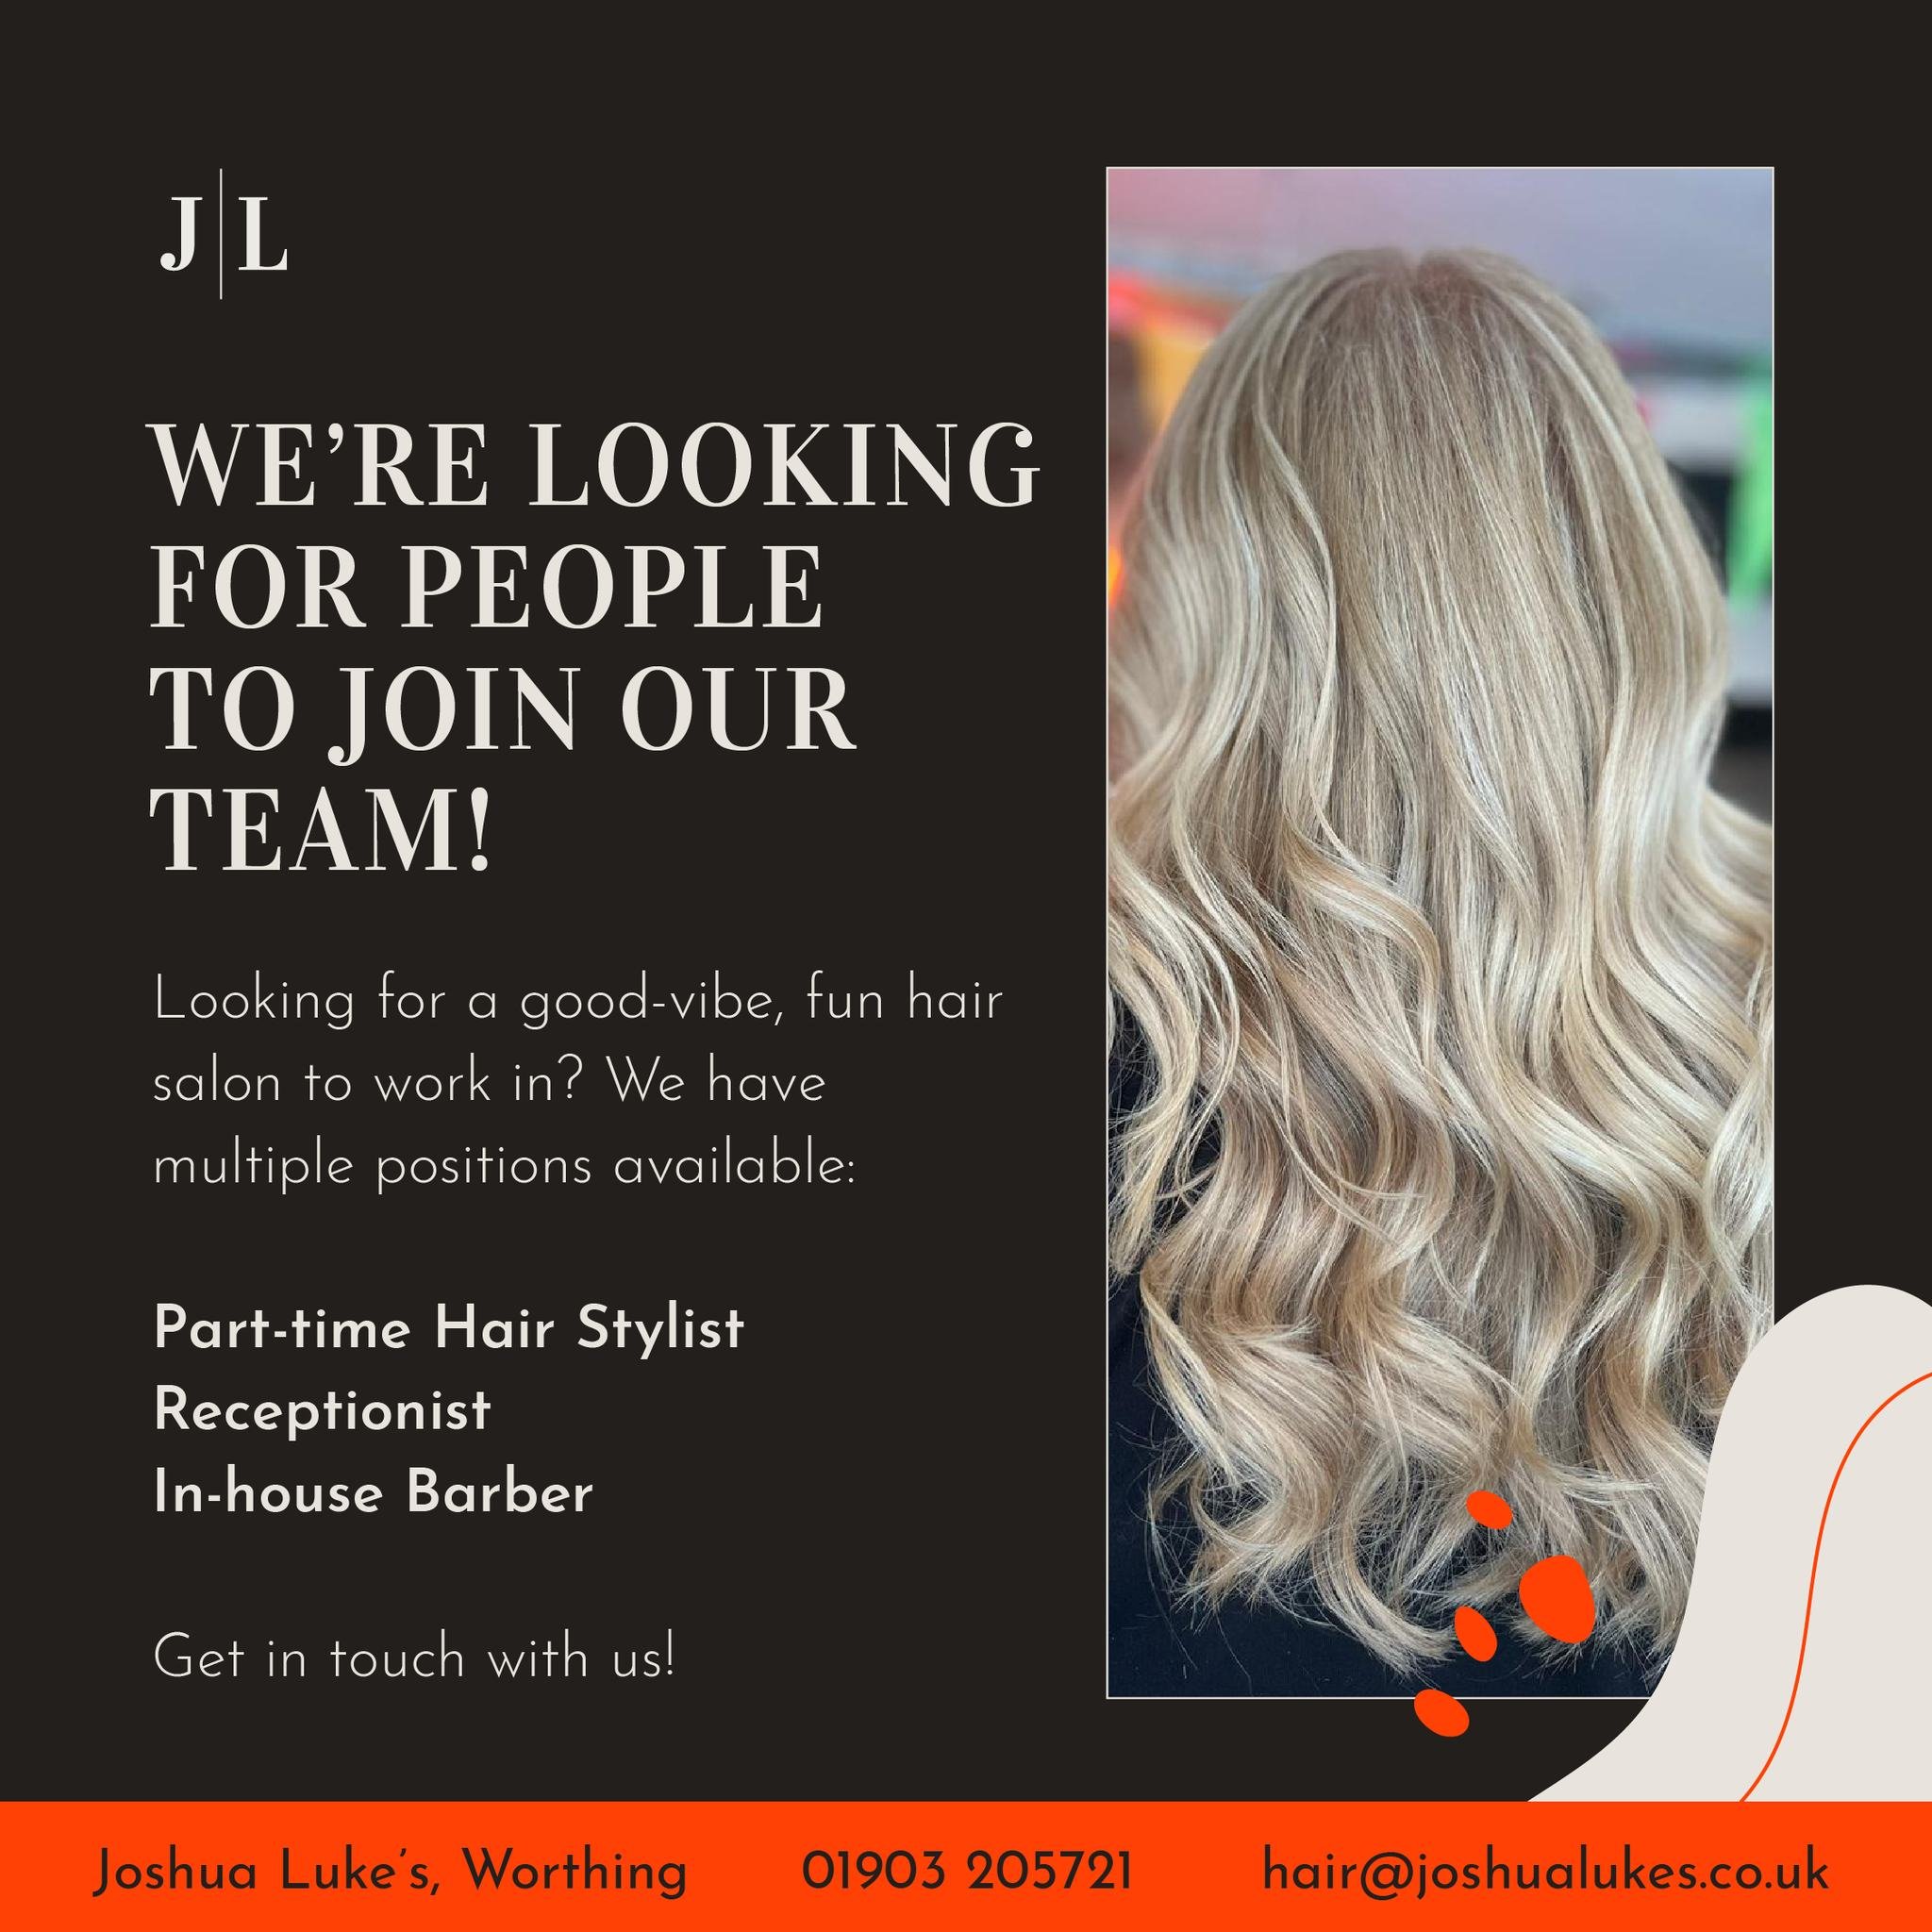 Join our vibrant team and let your career flourish at our funky, friendly hair salon in Worthing! 🌟✂️🙌

We're on the lookout for passionate individuals to fill key roles:

💇 Part-time Hair Stylist
📞 Receptionist
💈 In-house Barber

Experience our